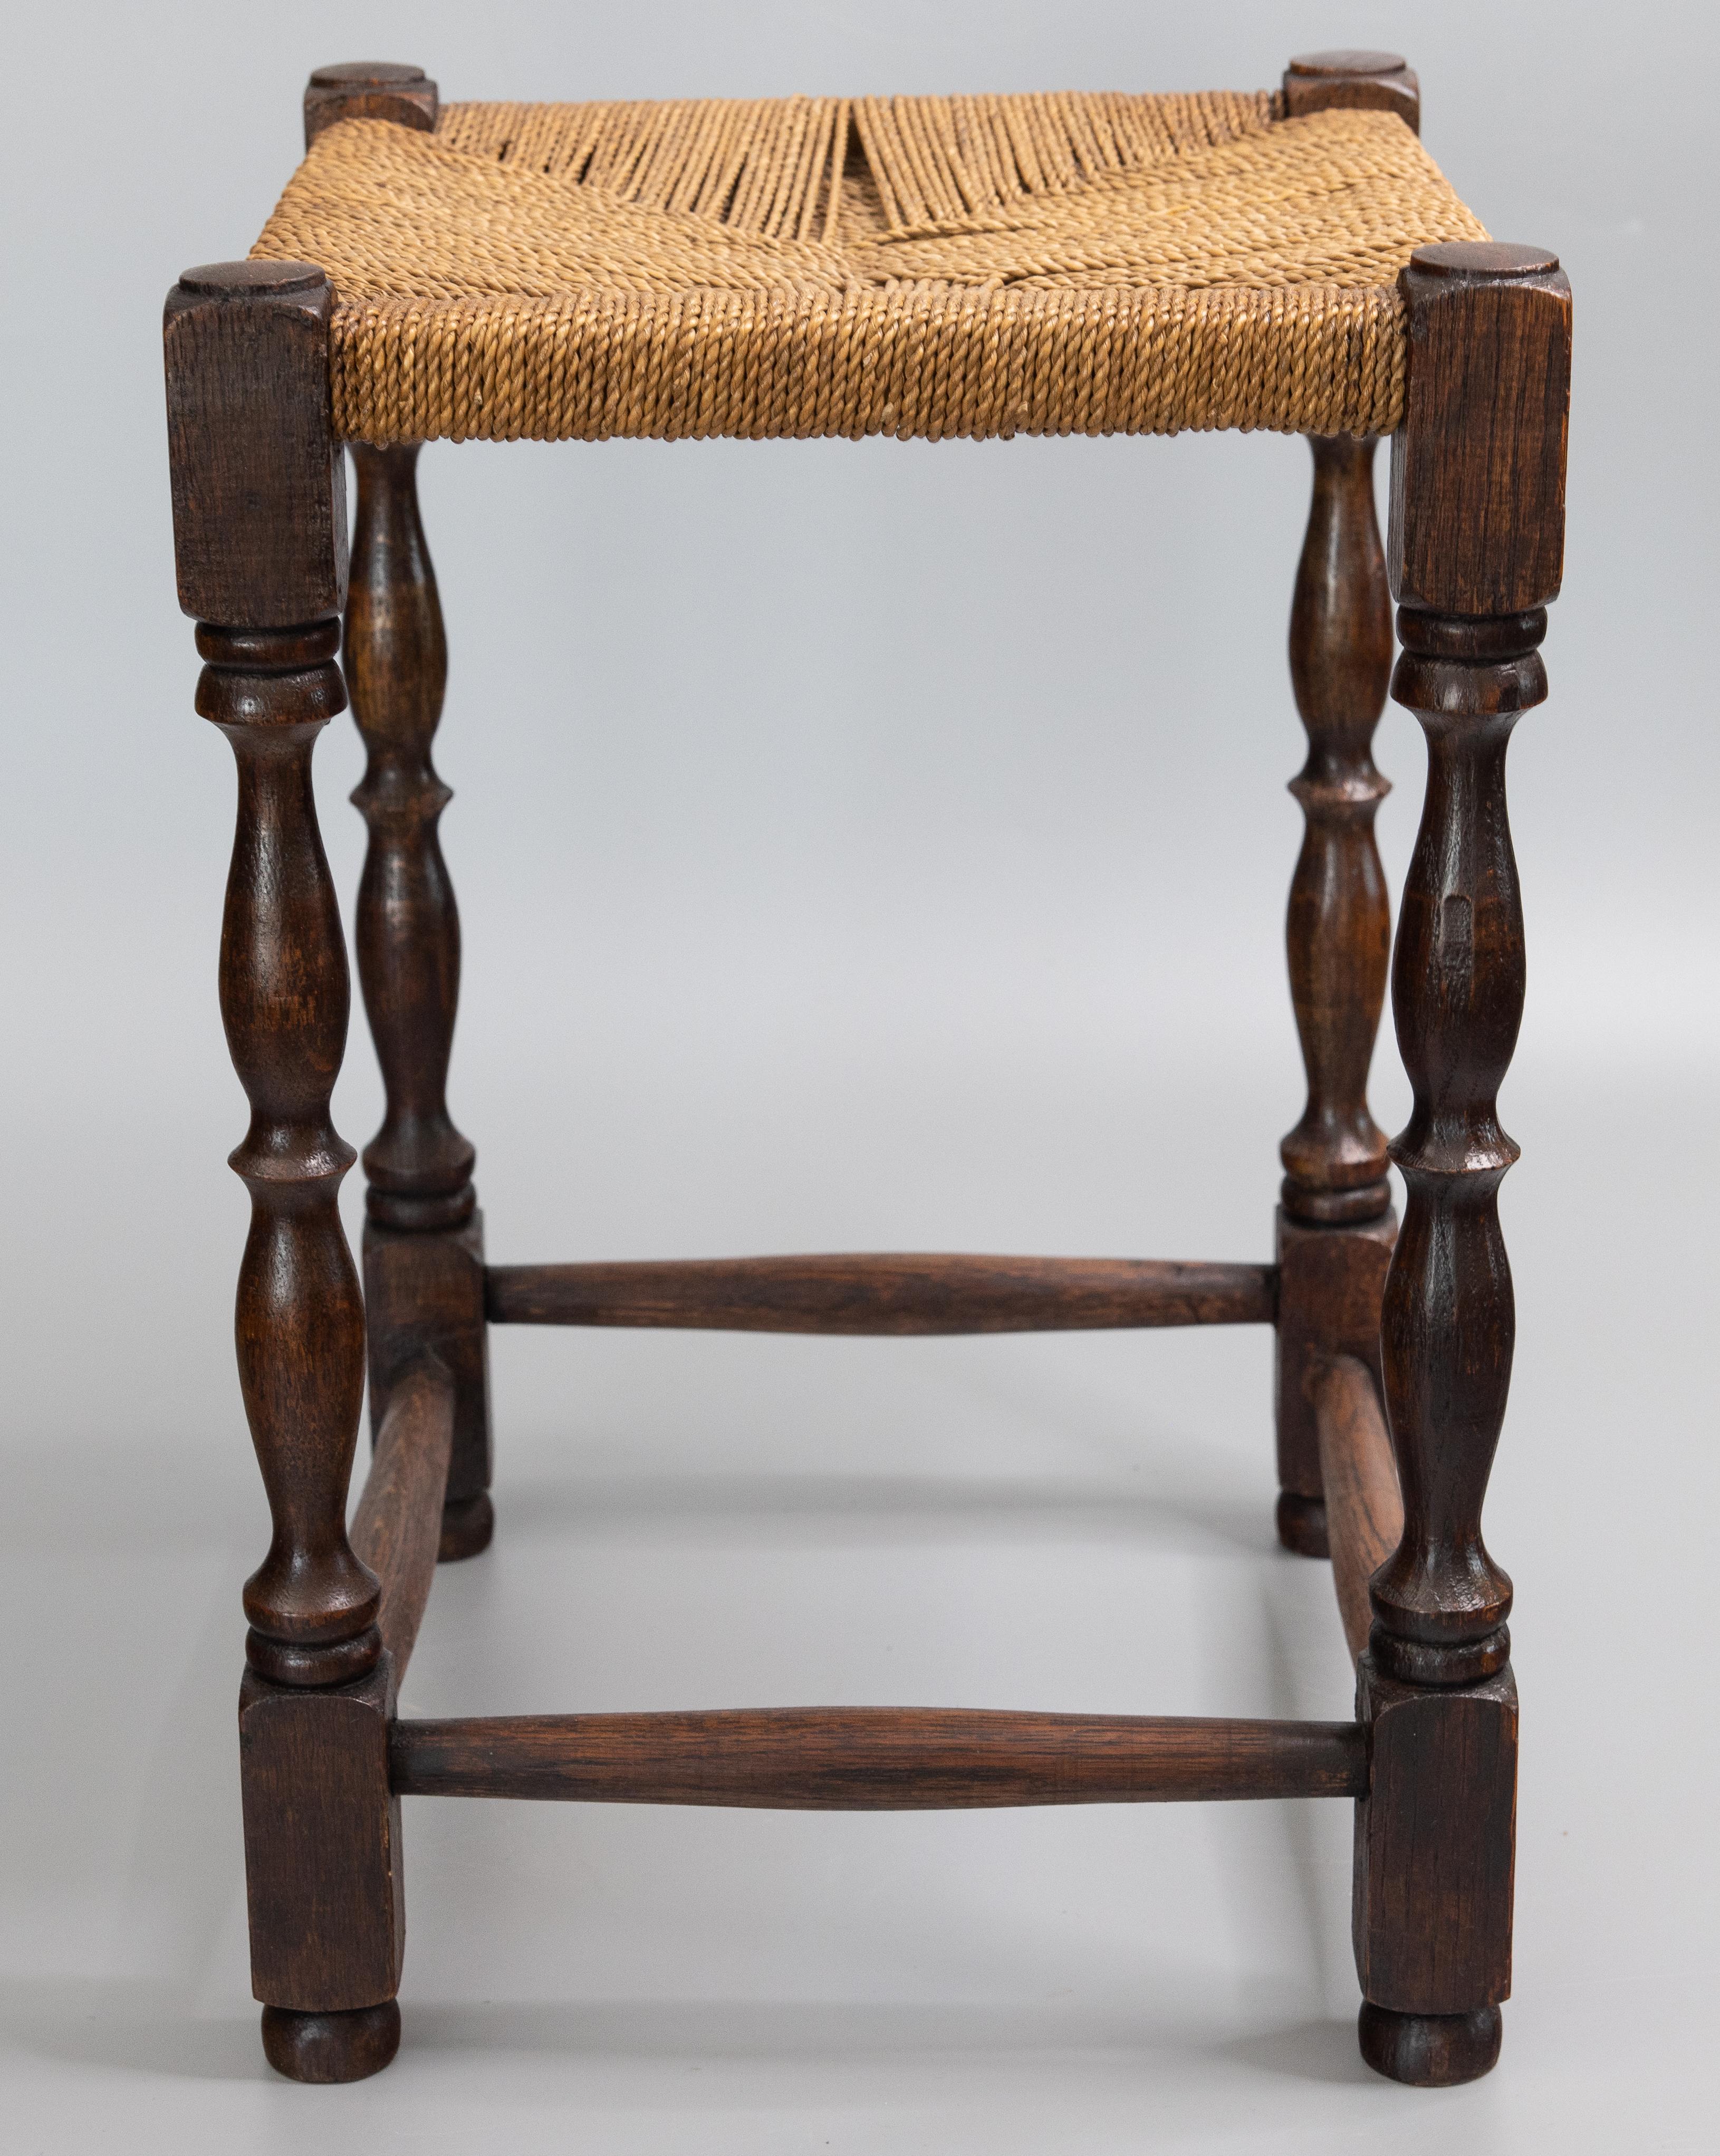 Antique English Oak Woven Cord Rope Stool Footstool, circa 1900 In Good Condition For Sale In Pearland, TX